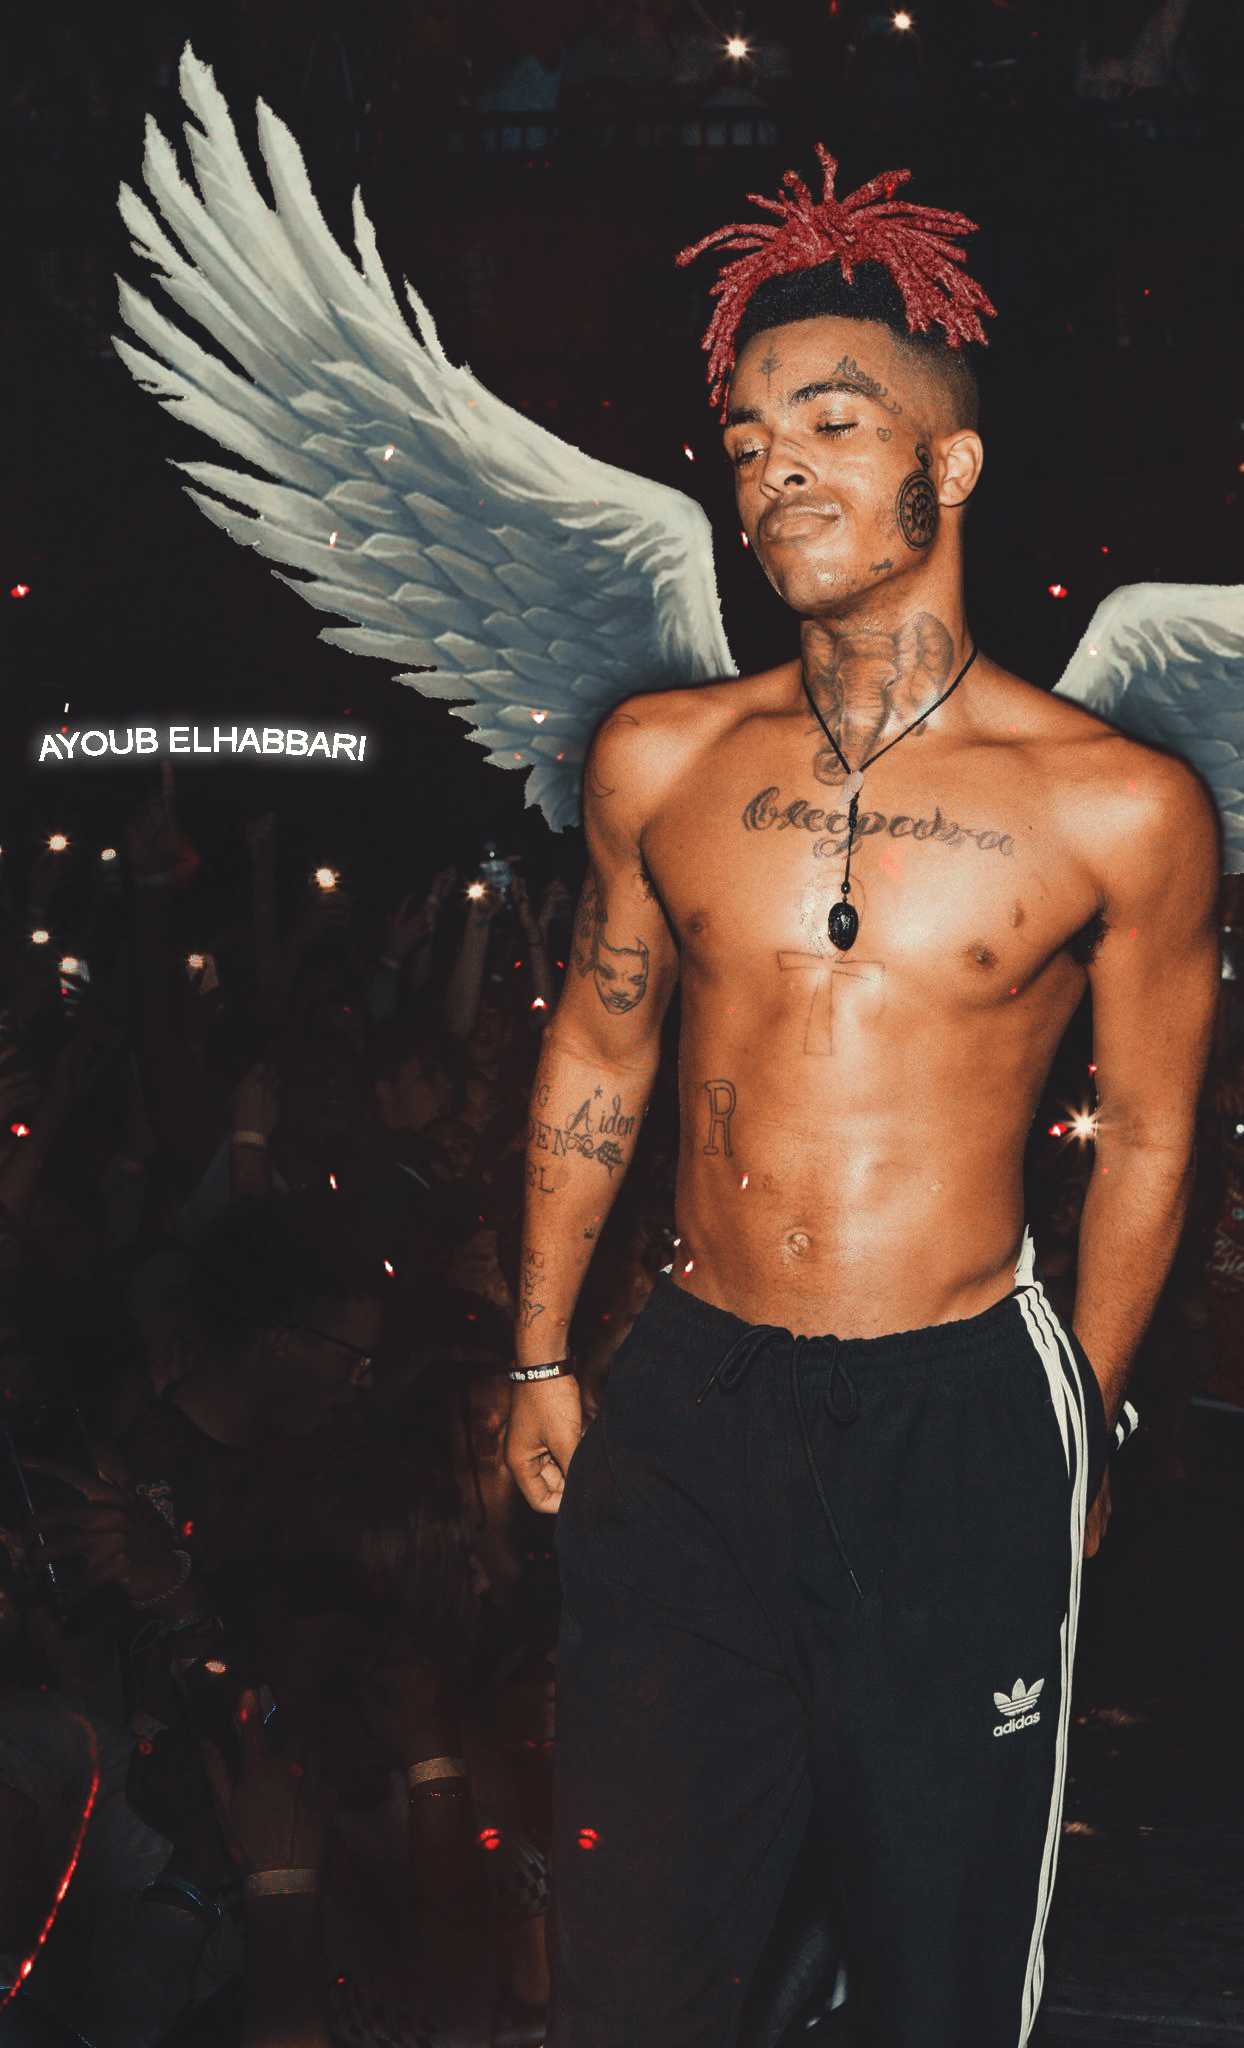 Free download XXXTentacion gfx made by me Life in 2019